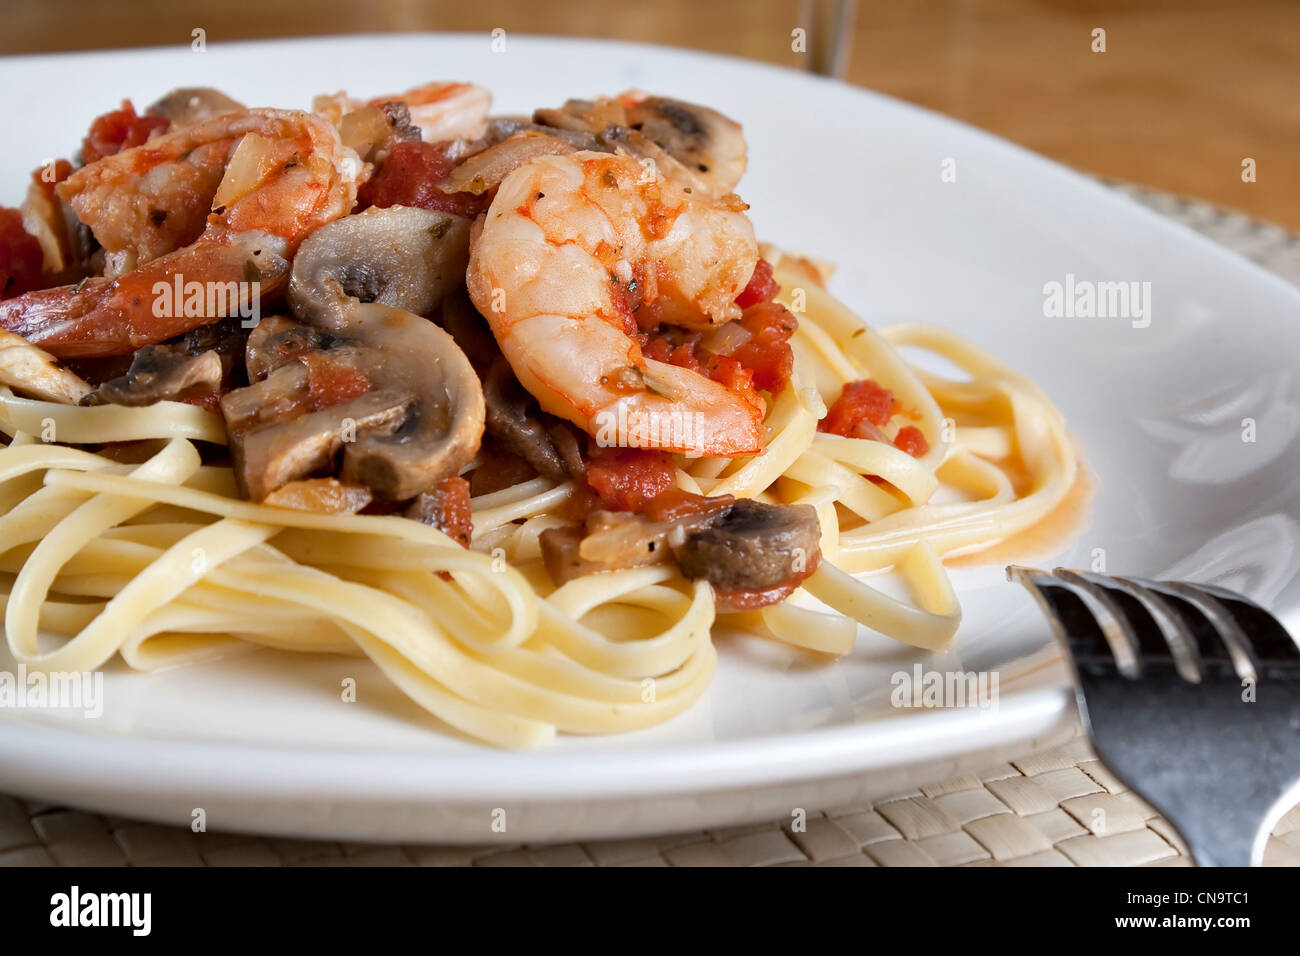 A delicious shrimp scampi pasta dish with mushrooms and diced tomatoes on a white plate. Stock Photo